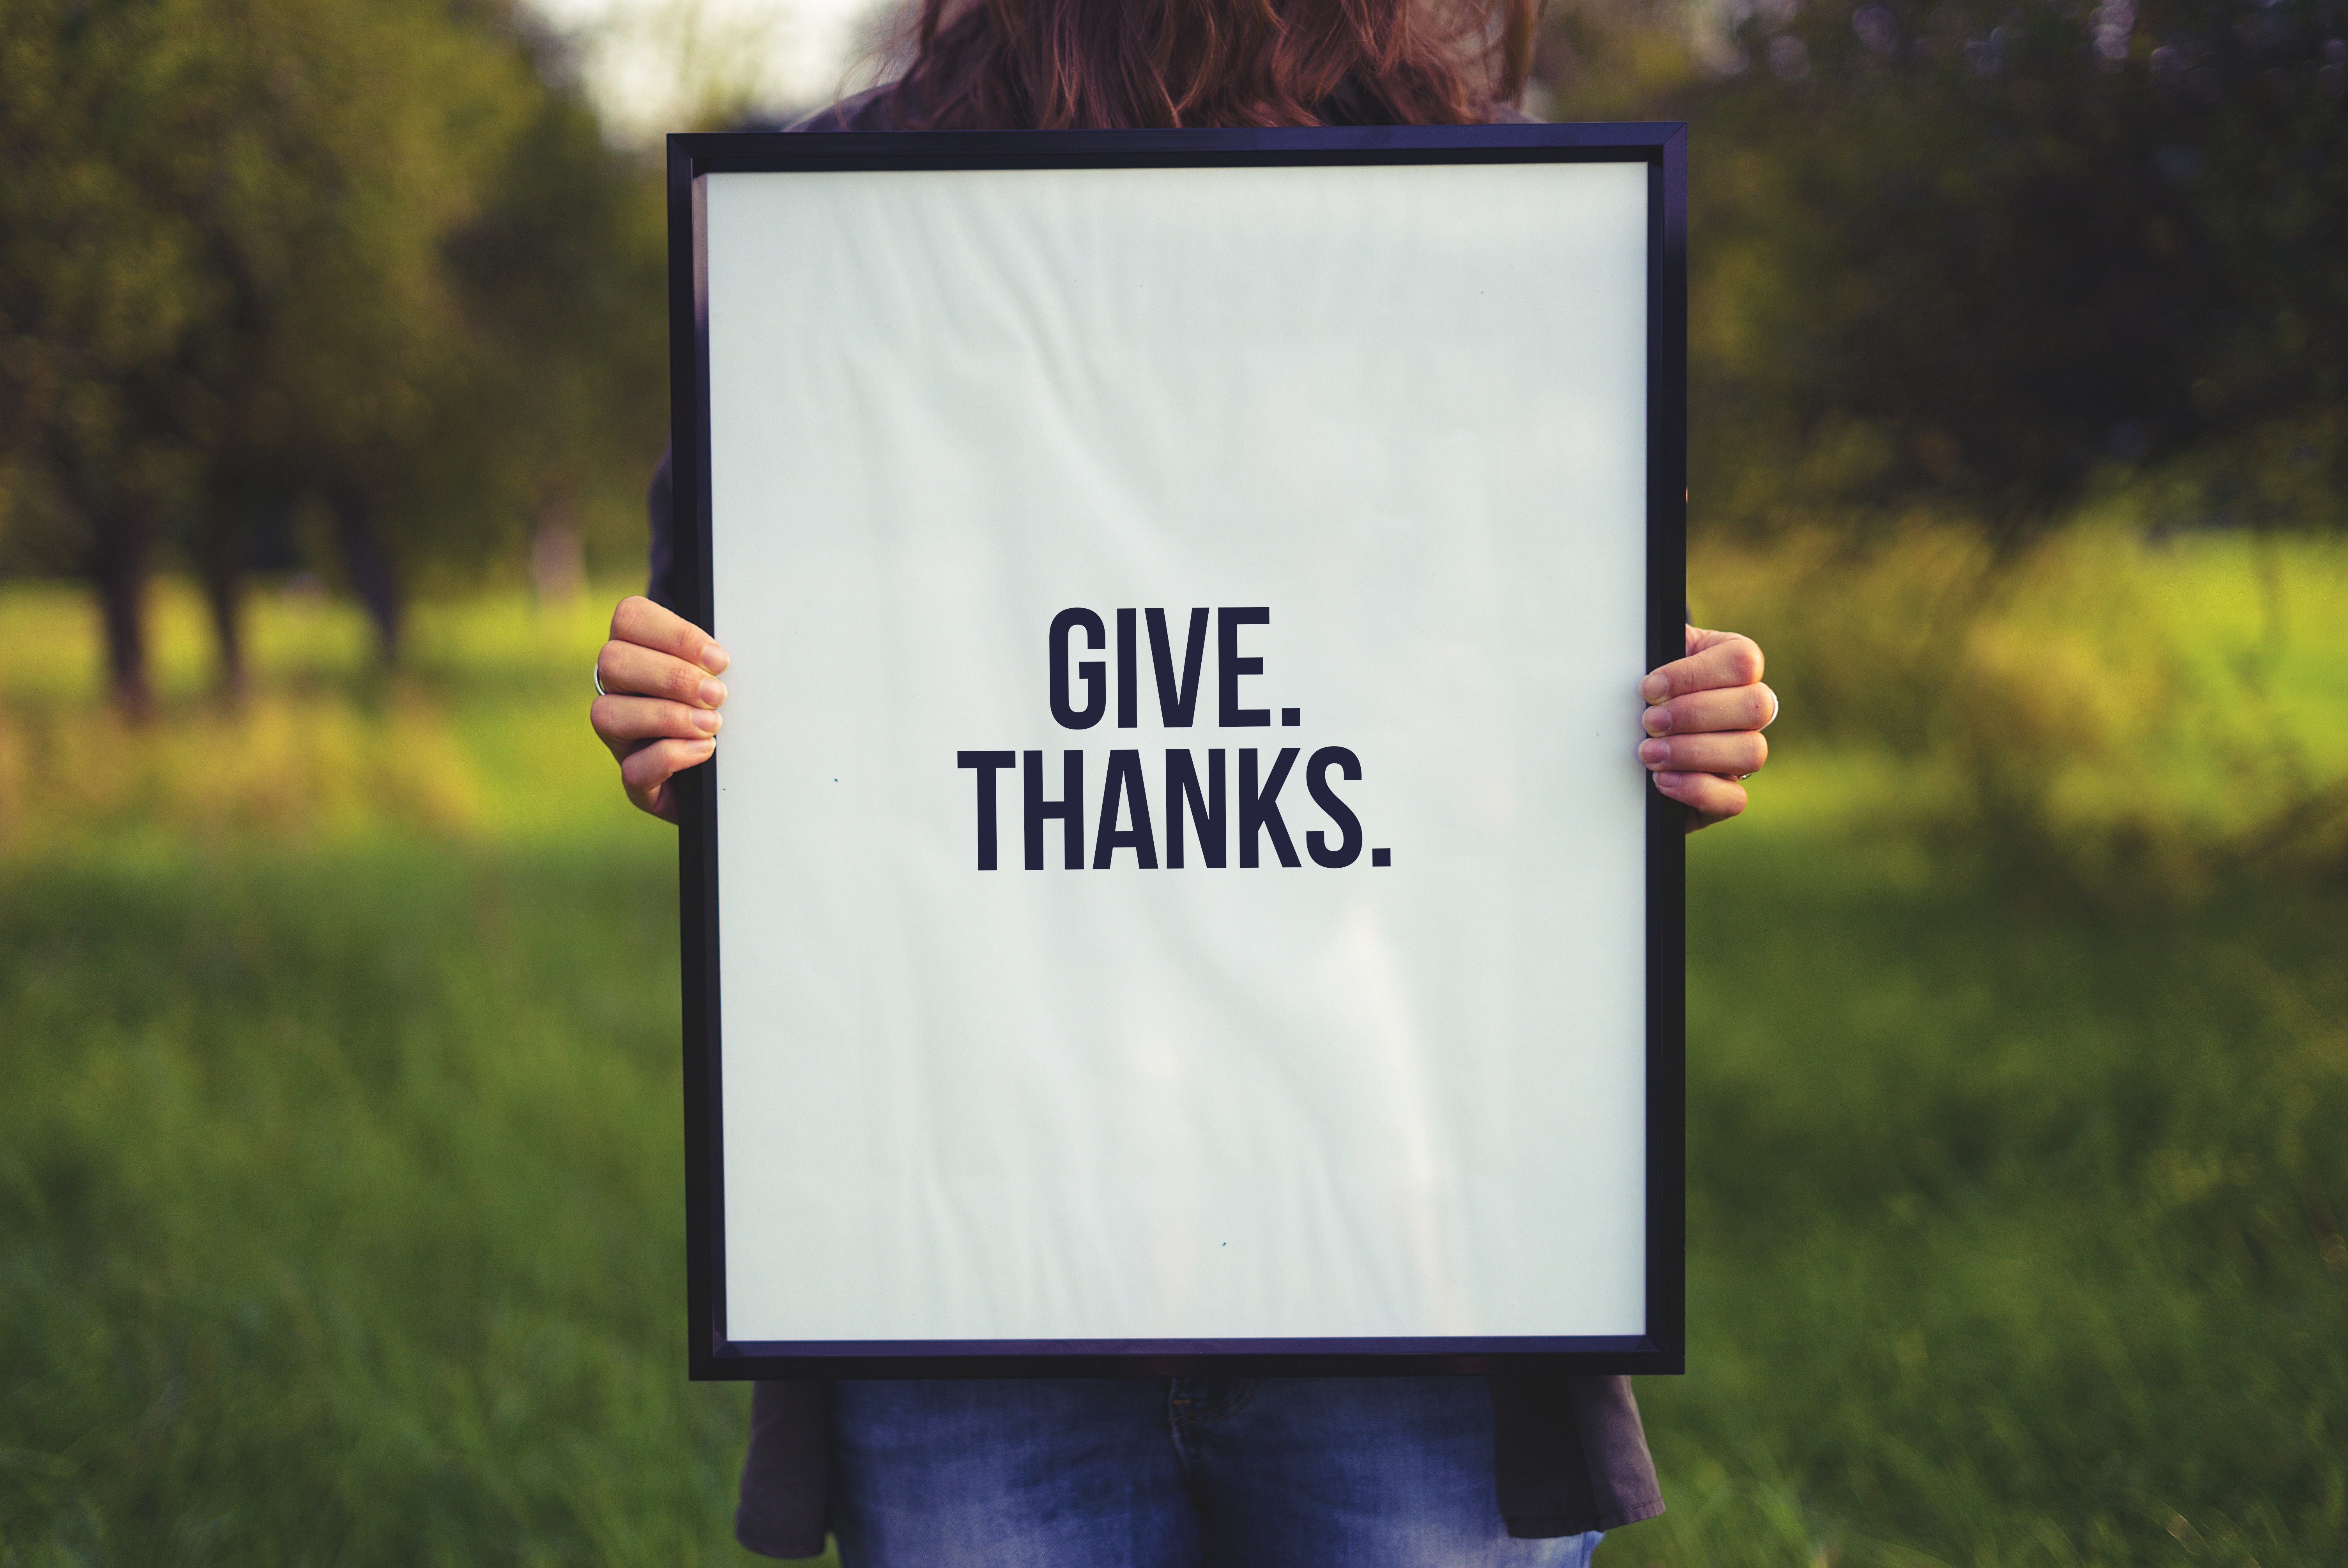 Give. Thanks. Photo by Simon Maage on Unsplash